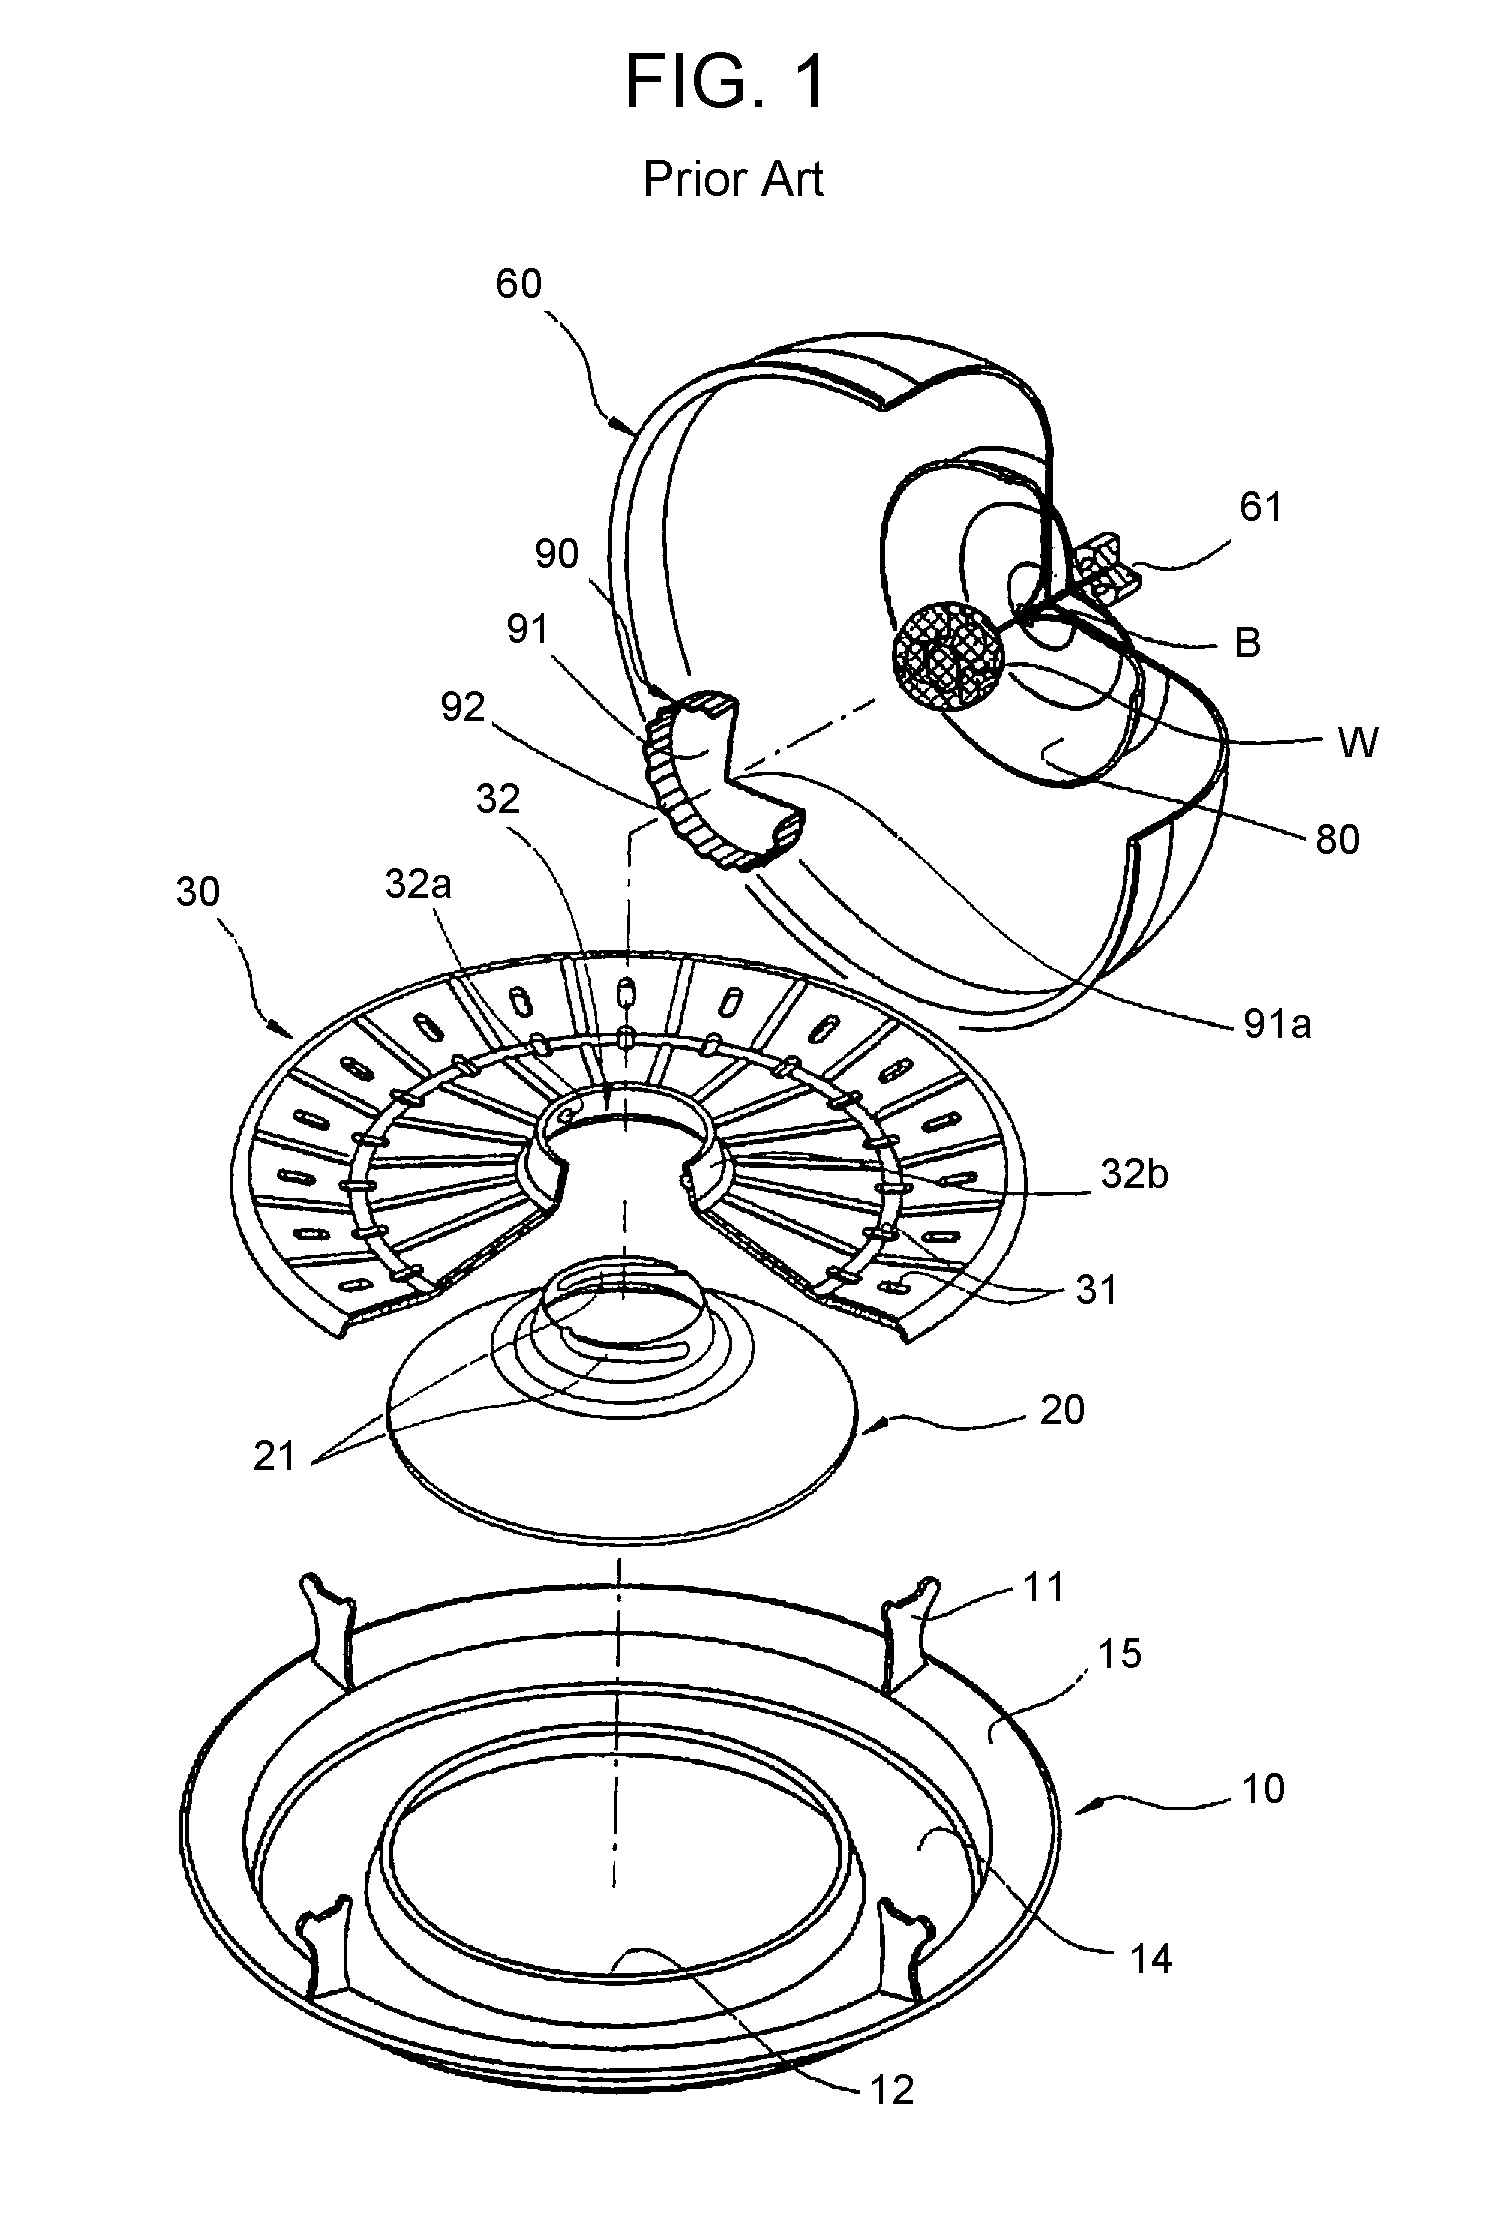 Portable cooking system